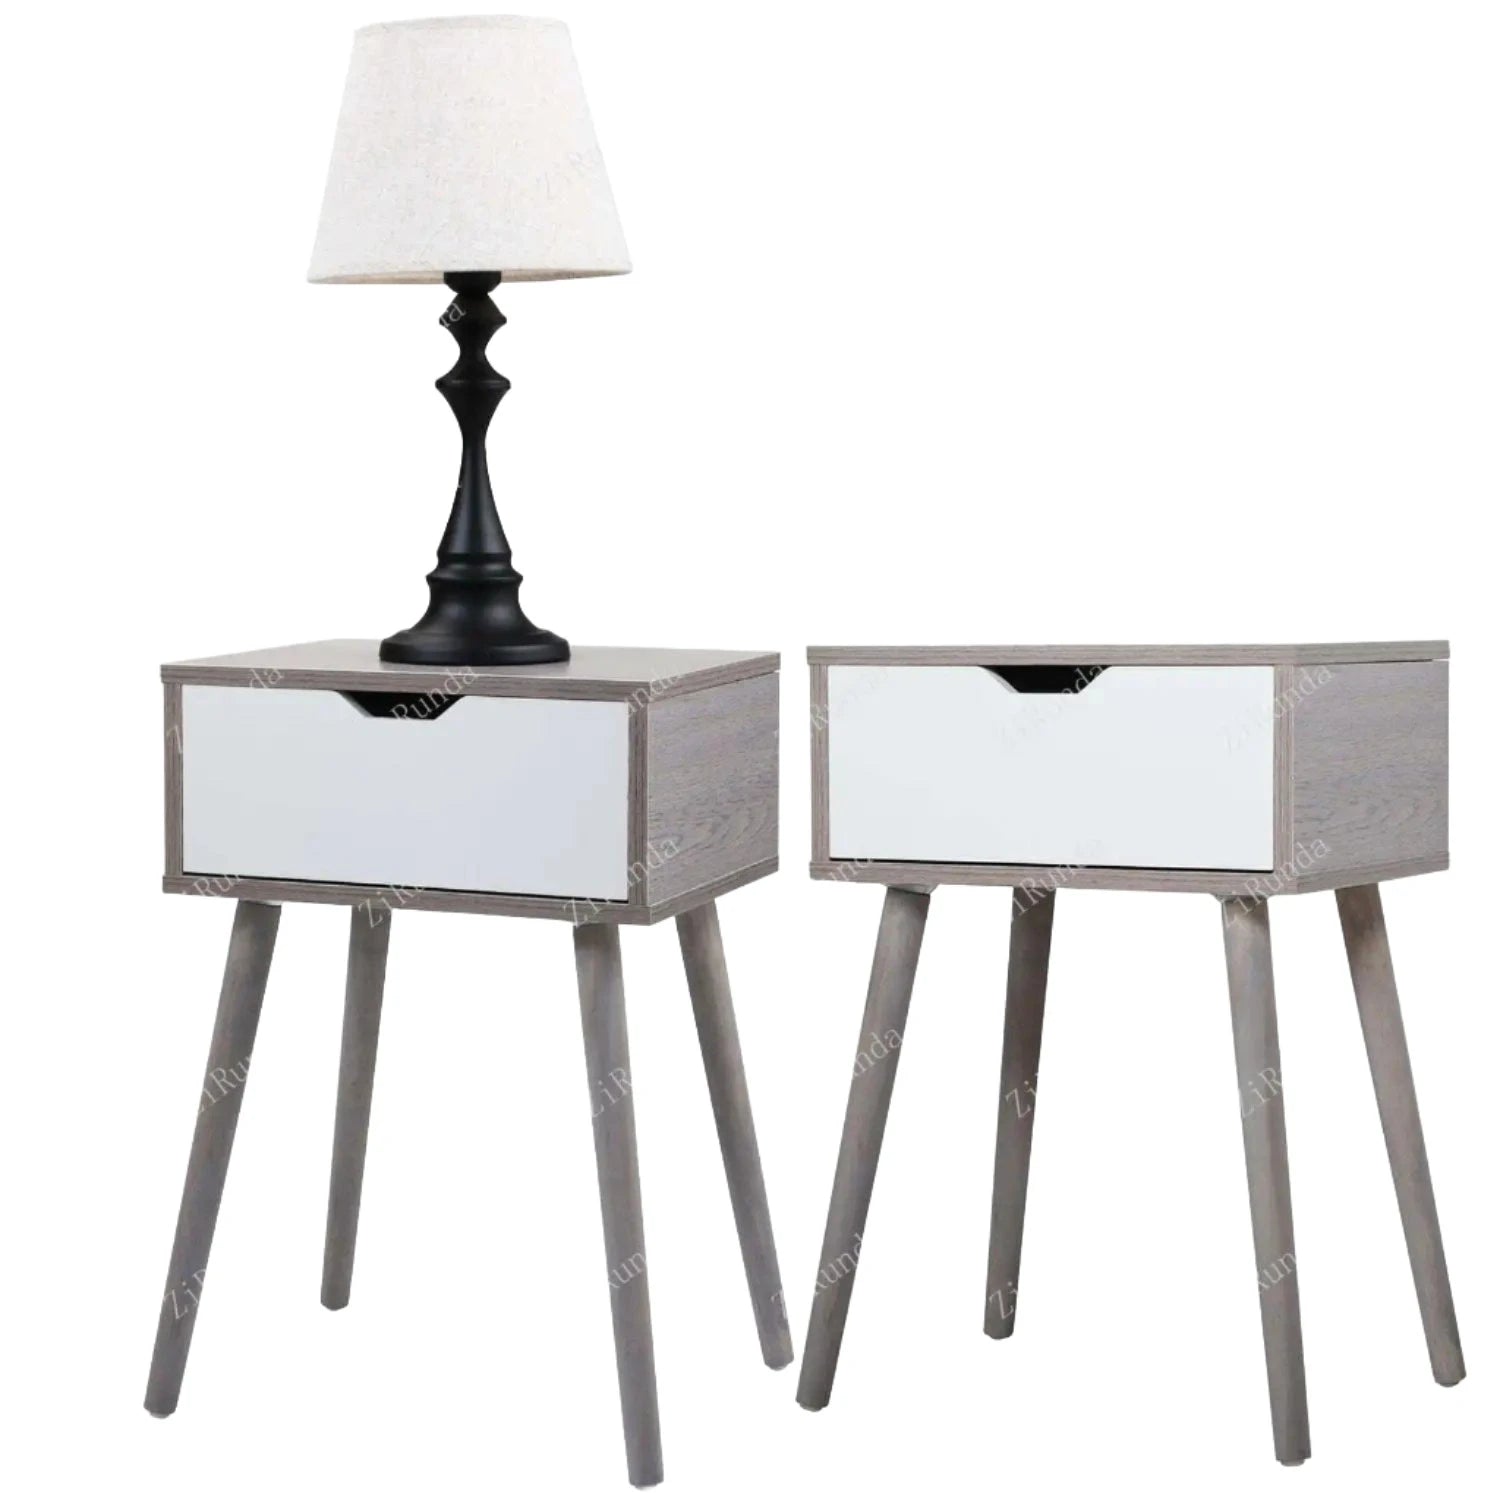 HomeBound Essentials Grey white L Set of 2 Wood Nightstand with Storage Drawer & Solid Wood Leg,  Bedside Tables Furniture  Nightstand